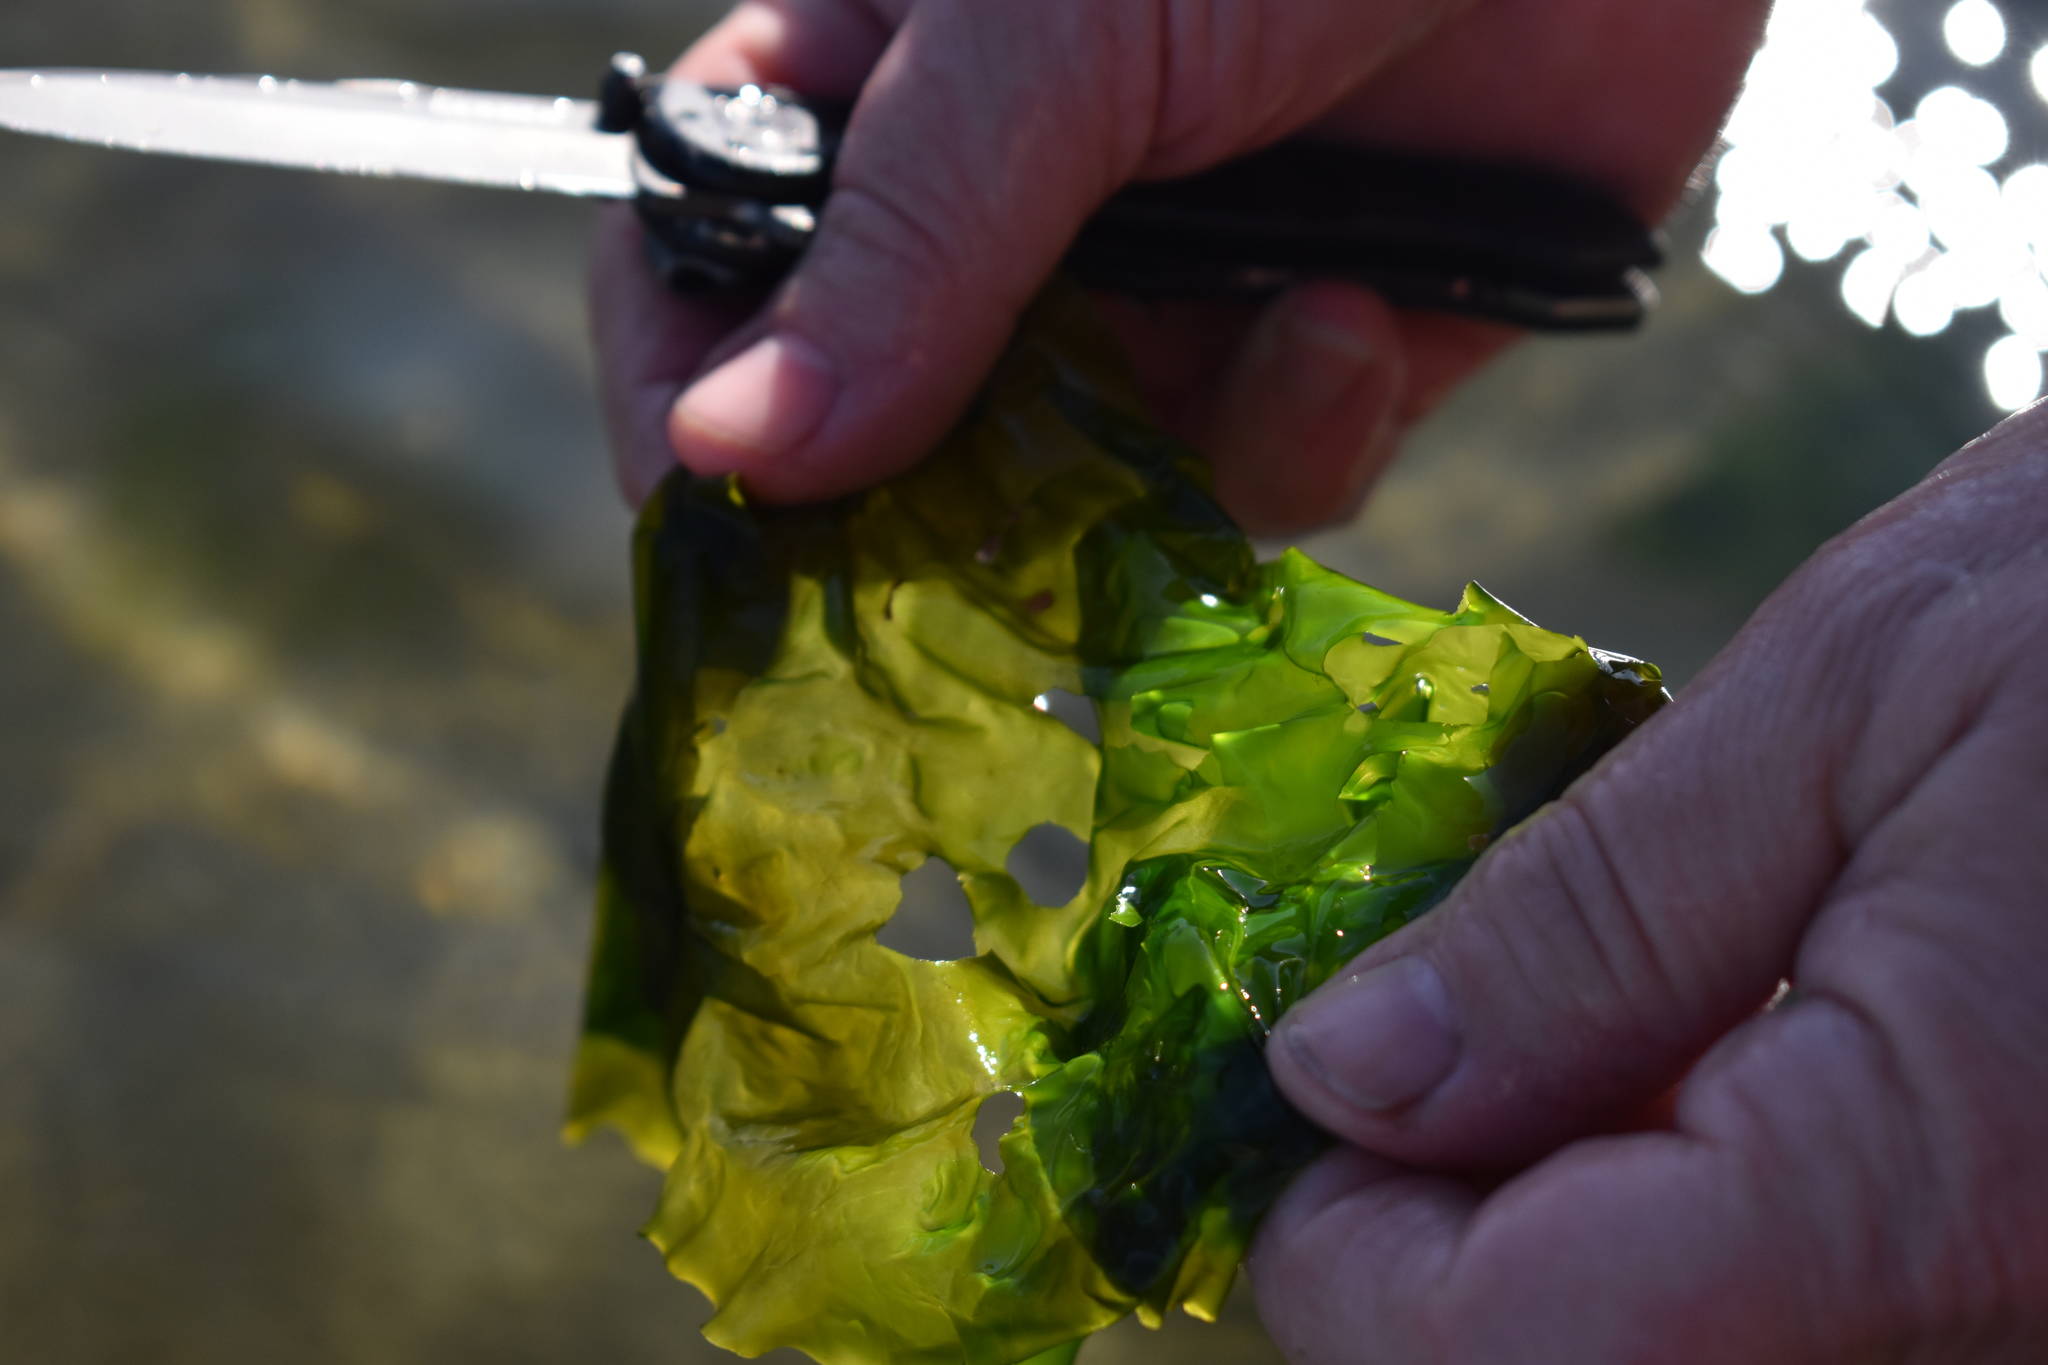 Karen Achabal cuts a piece of sea lettuce. Harvesters must cut seaweed during harvest and not pull or rip it off the rocks, according to state Department of Fish and Wildlife rules.